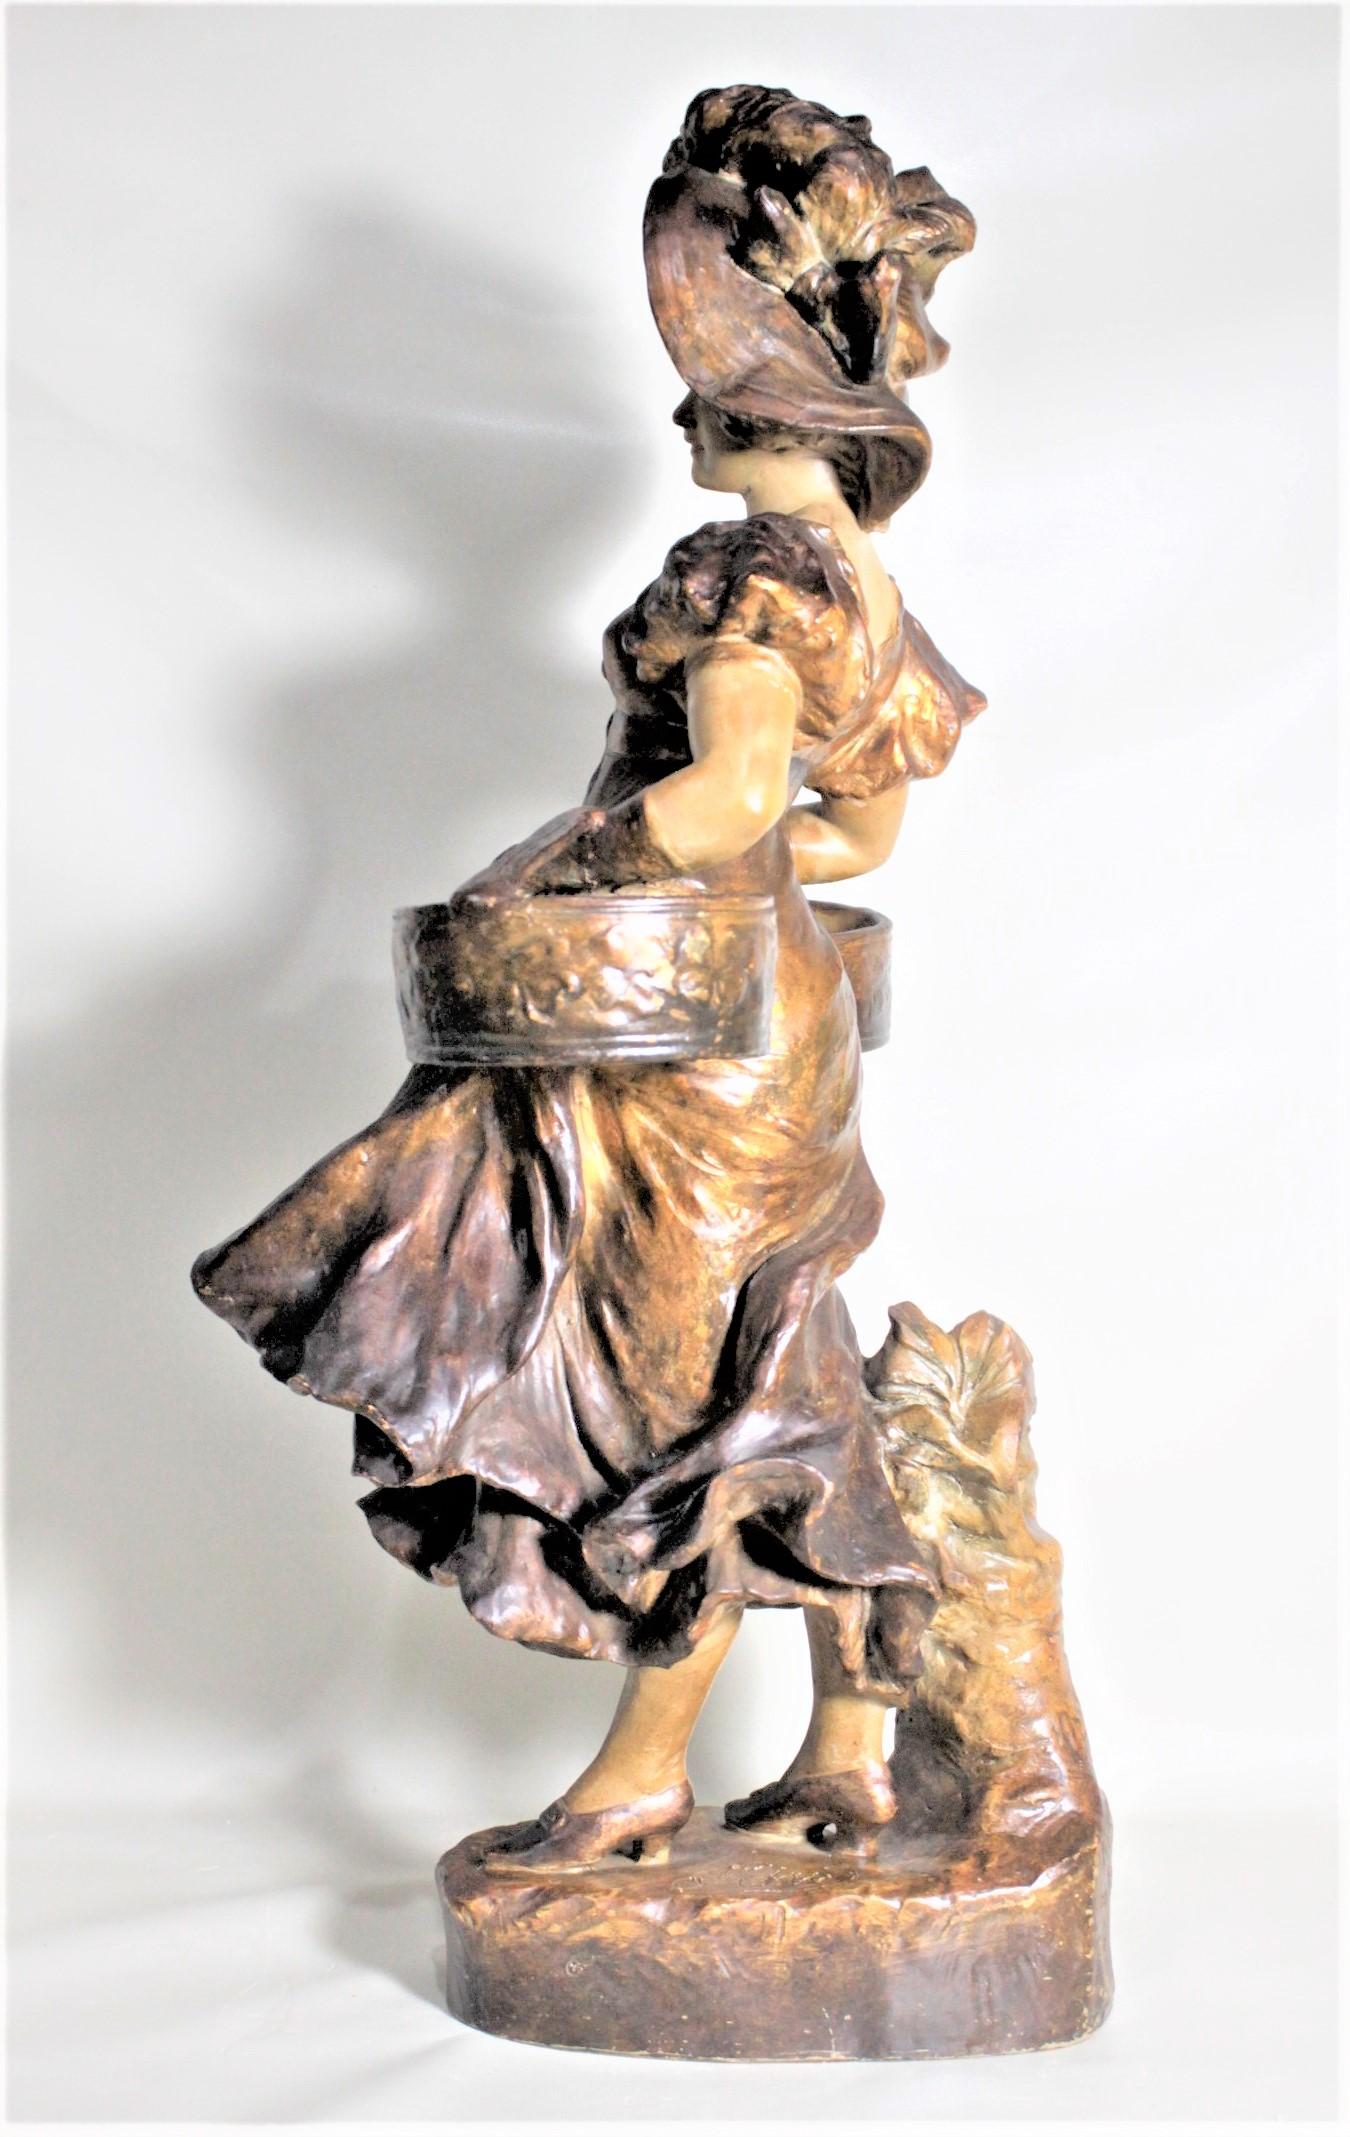 Art Nouveau Otto Petri Glazed Earthenware Sculpture of a Woman Carrying Baskets In Good Condition For Sale In Hamilton, Ontario